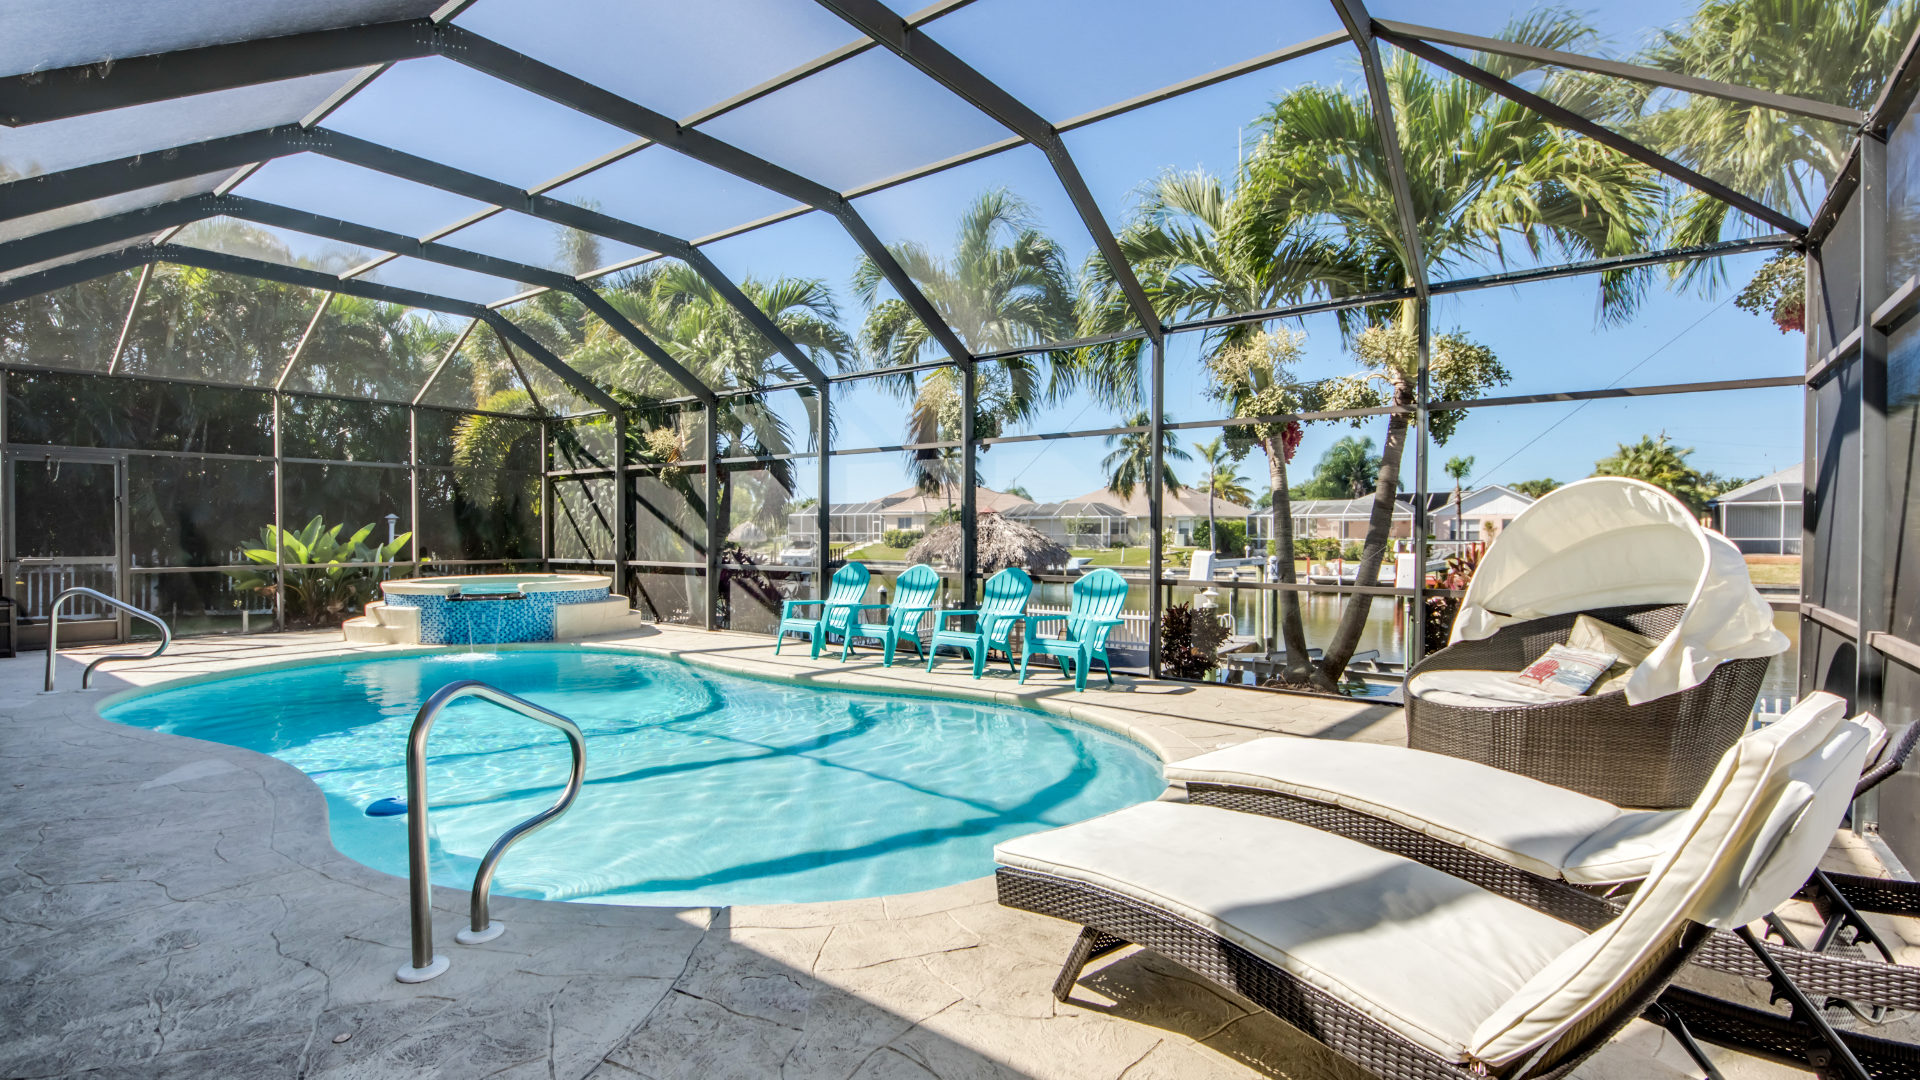 Heated pool vacation rental with southern pool exposure in Cape Coral, Florida